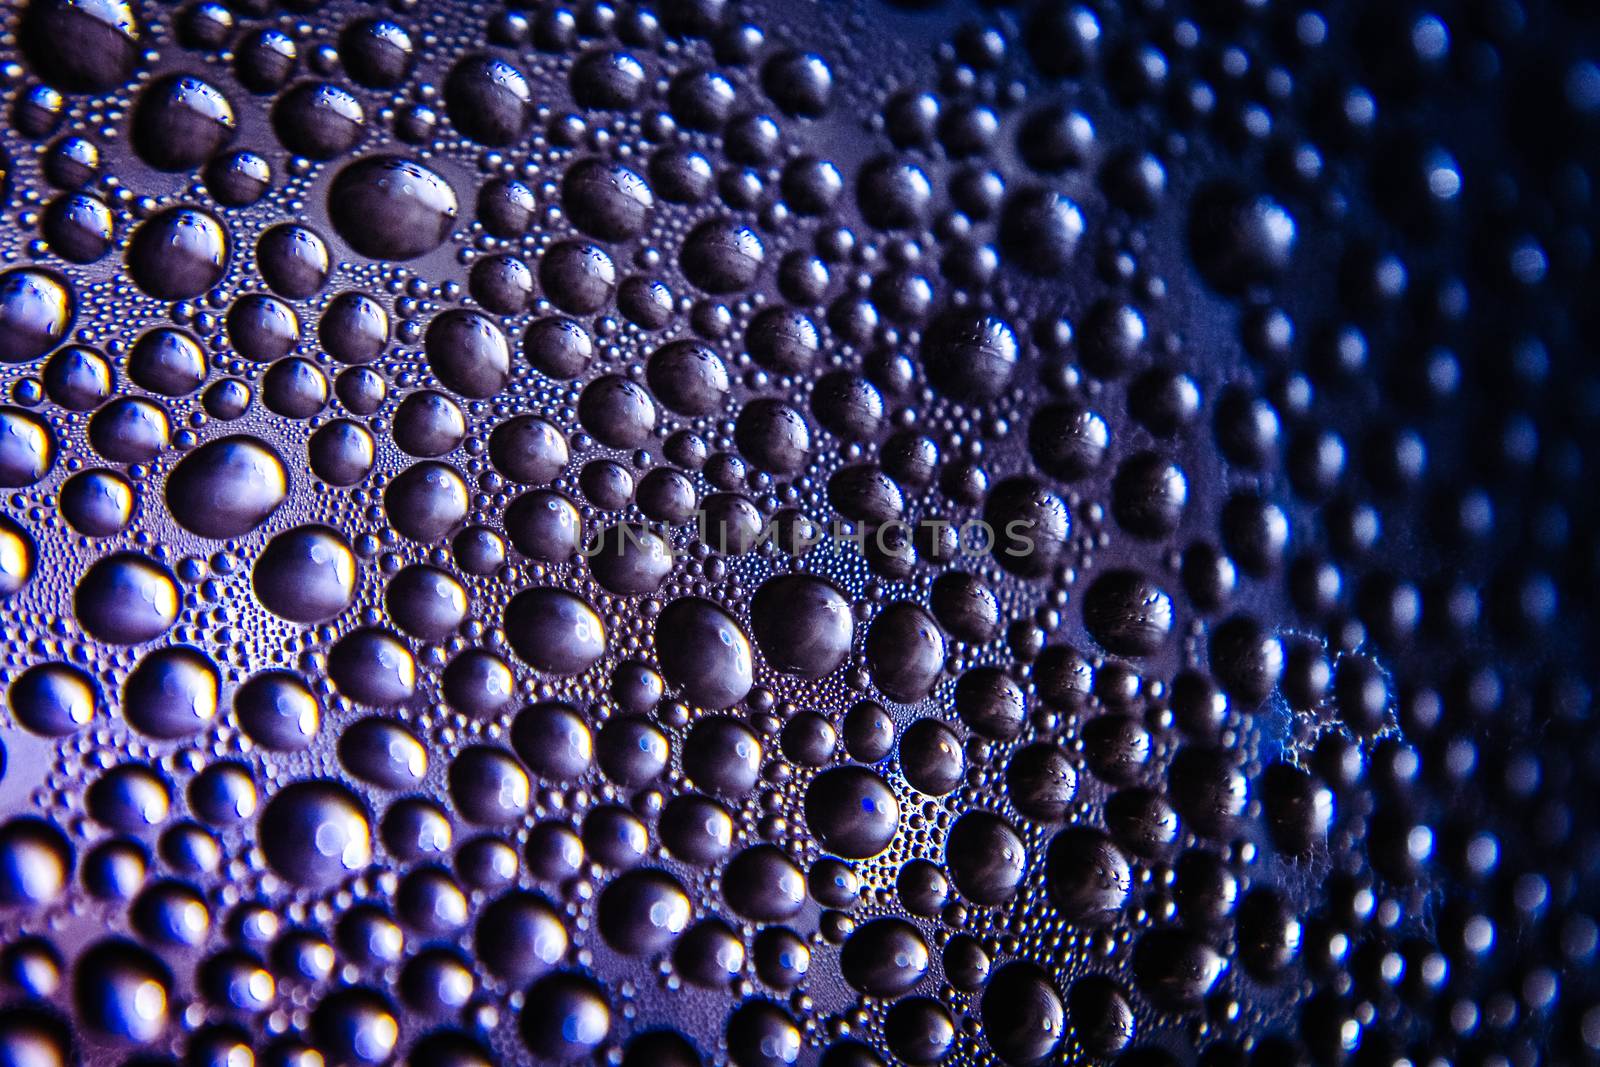 Texture of water drops on bottle for background